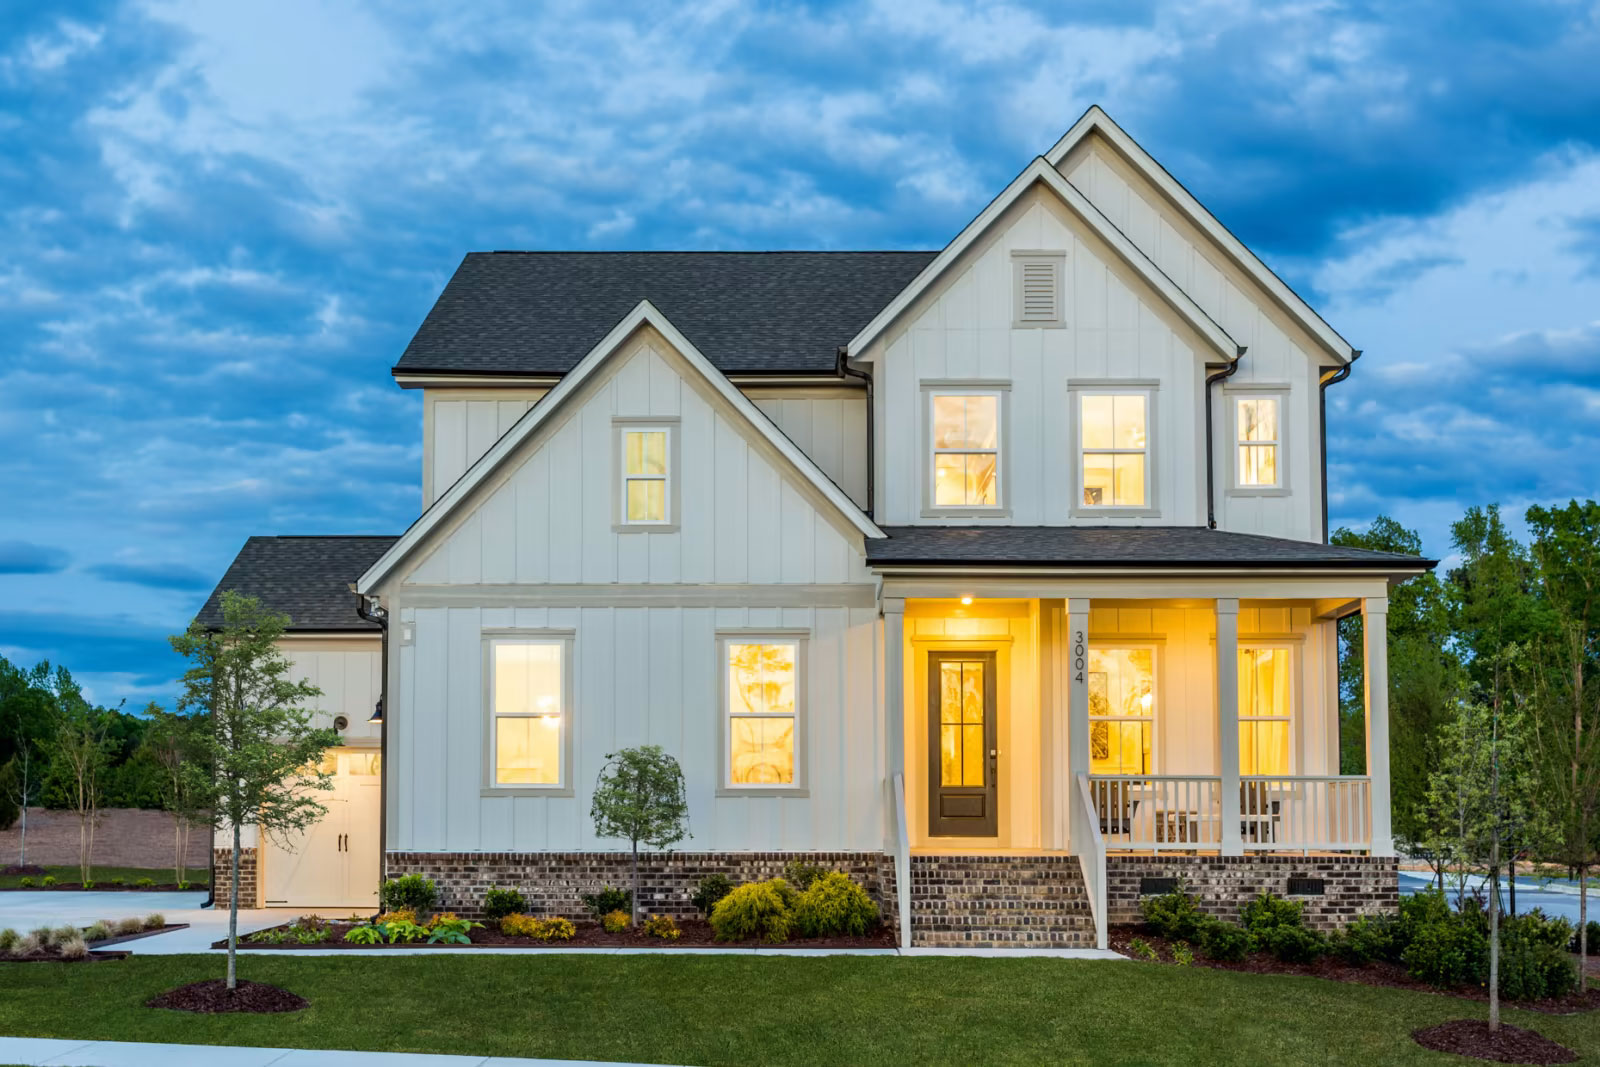 New Construction Homes Raleigh NC - Find Your New Construction Home